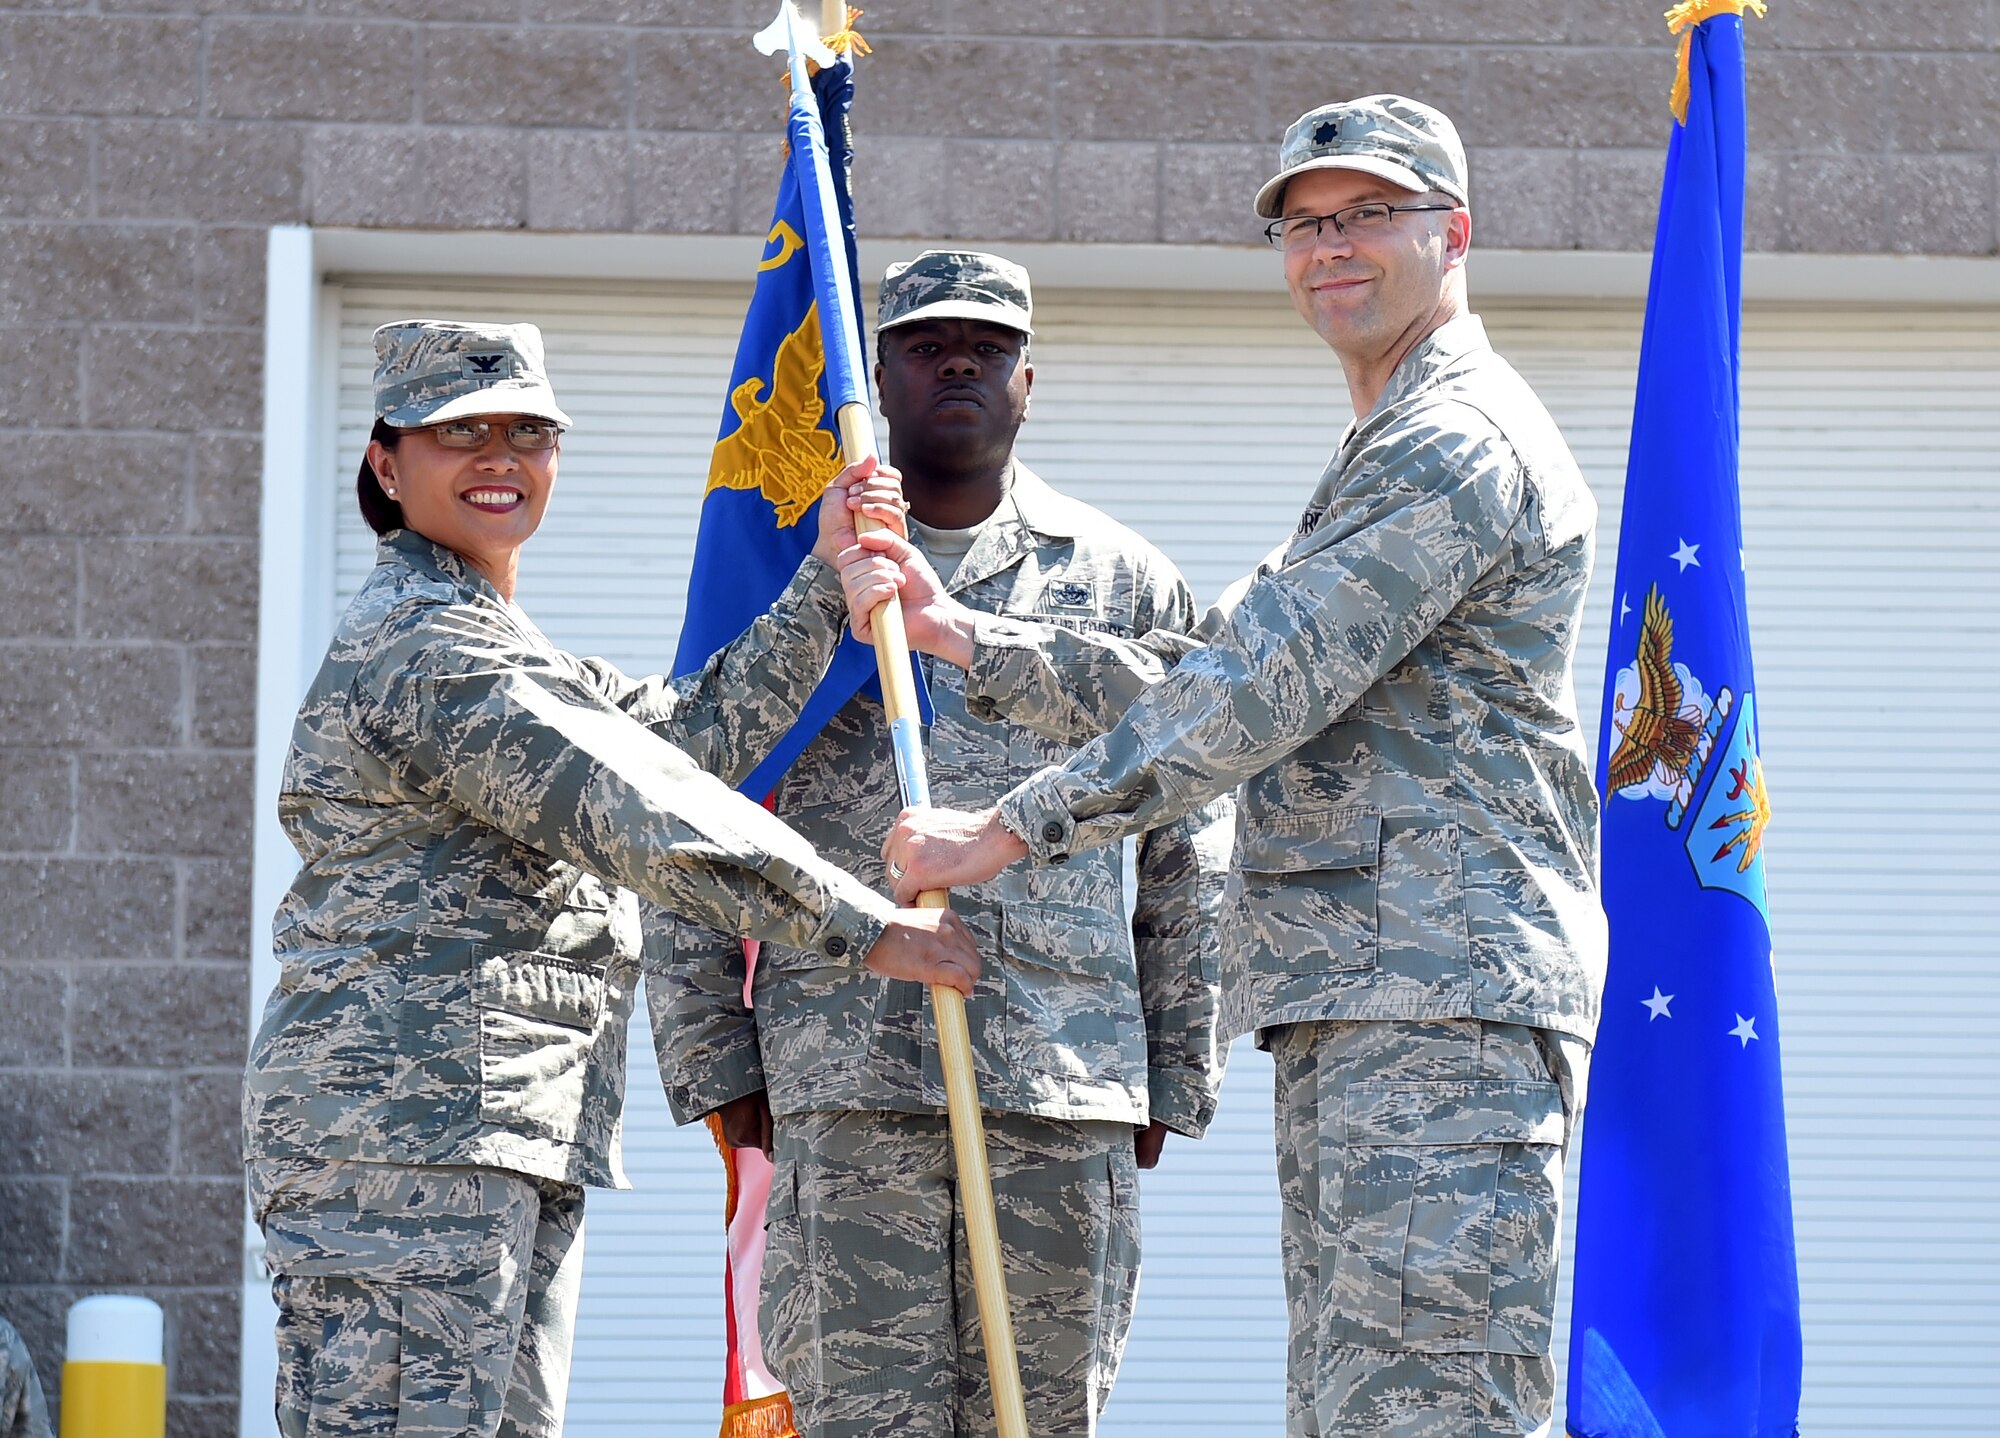 Lt. Col. Allen Theibeux, right; relinquishes his command of the 460th Civil Engineer Squadron to Col. Rose Jourdan, 460th Mission Support Group commander, left; during the change of command ceremony June 30, 2015, on Buckley Air Force Base, Colo. Theibeux has been in command of the 460th CES since June 2013, where he led the squadron through fiscal challenges, damaging weather events and decreases in manpower. (U.S. Air Force photo by Airman 1st Class Emily E. Amyotte/Released)